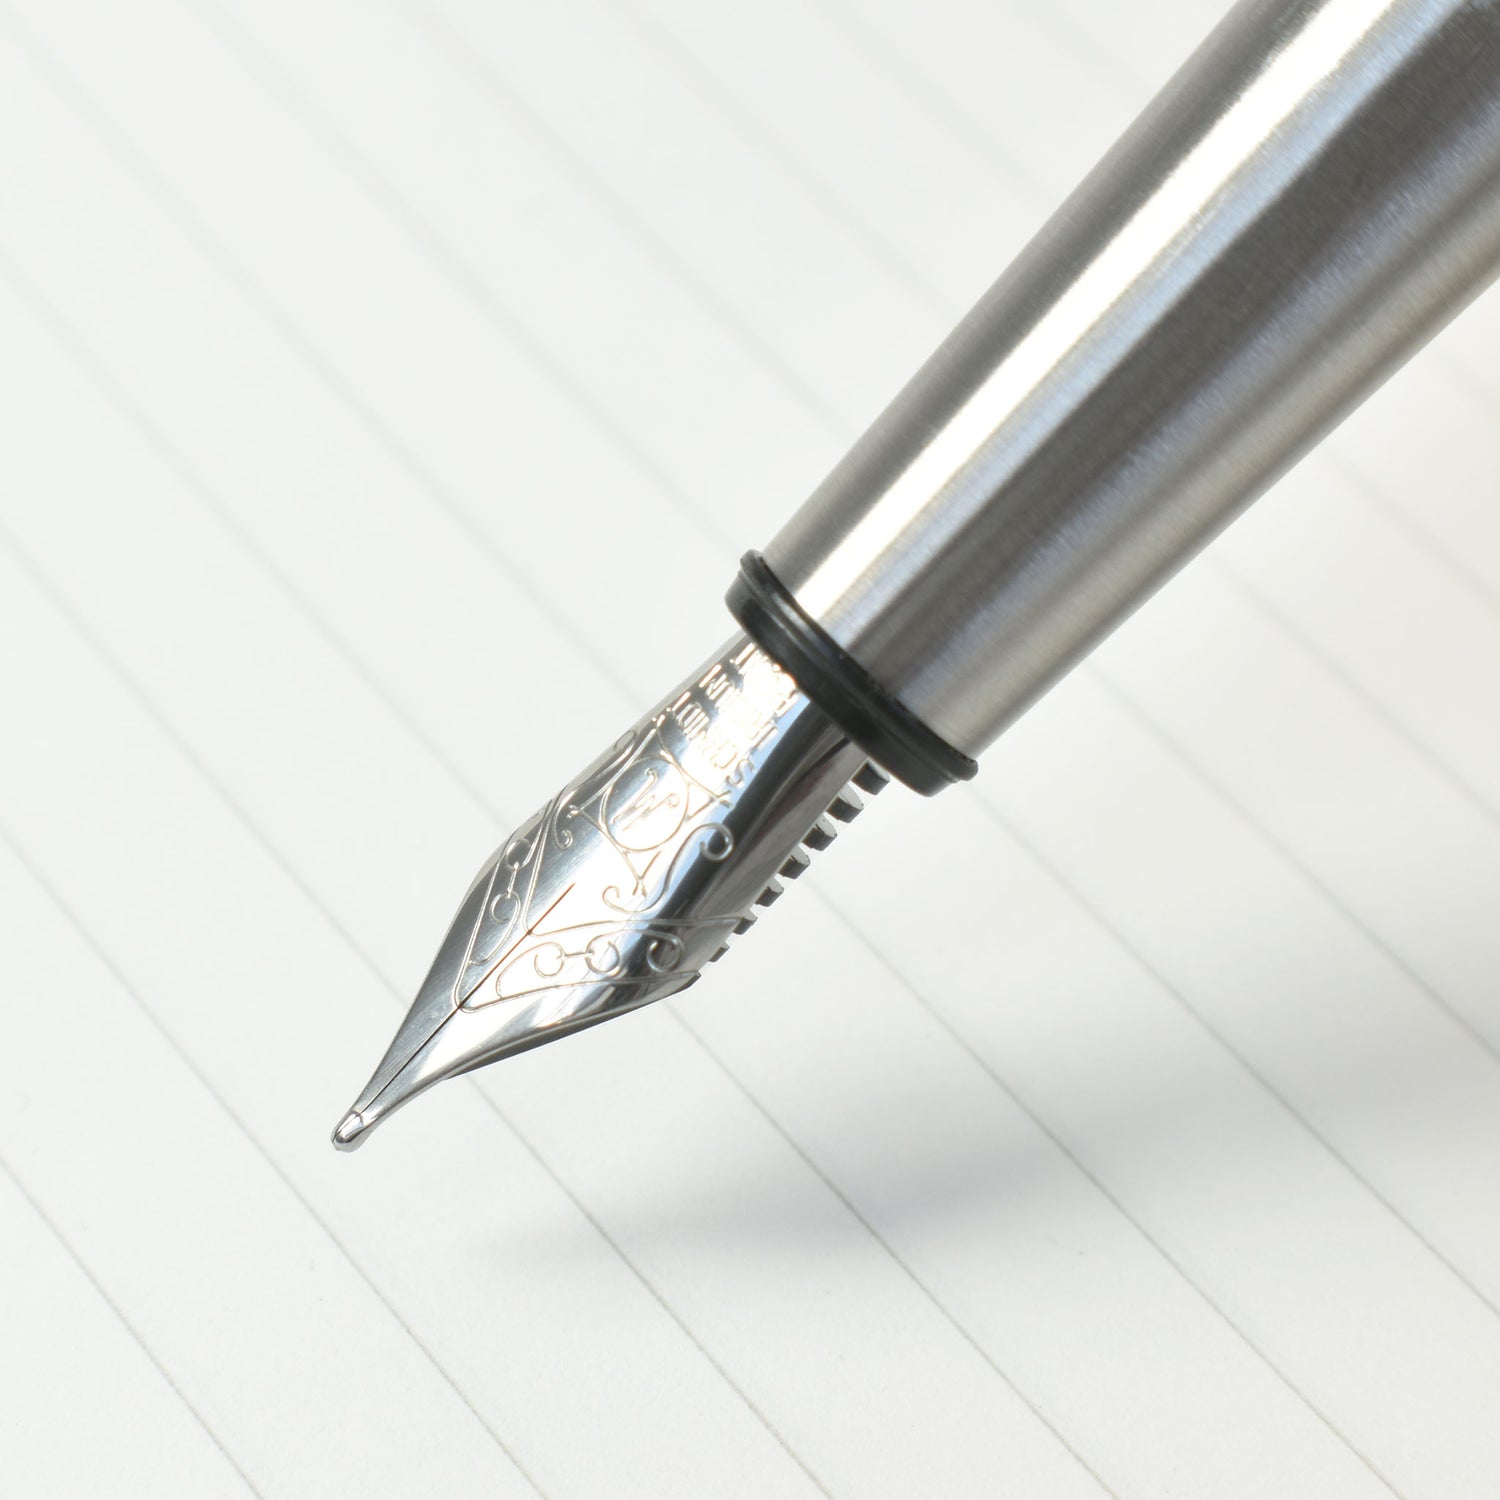 Detail image of the iridium Schmidt nib. Writing excellence from our stainless steel fountain pen.